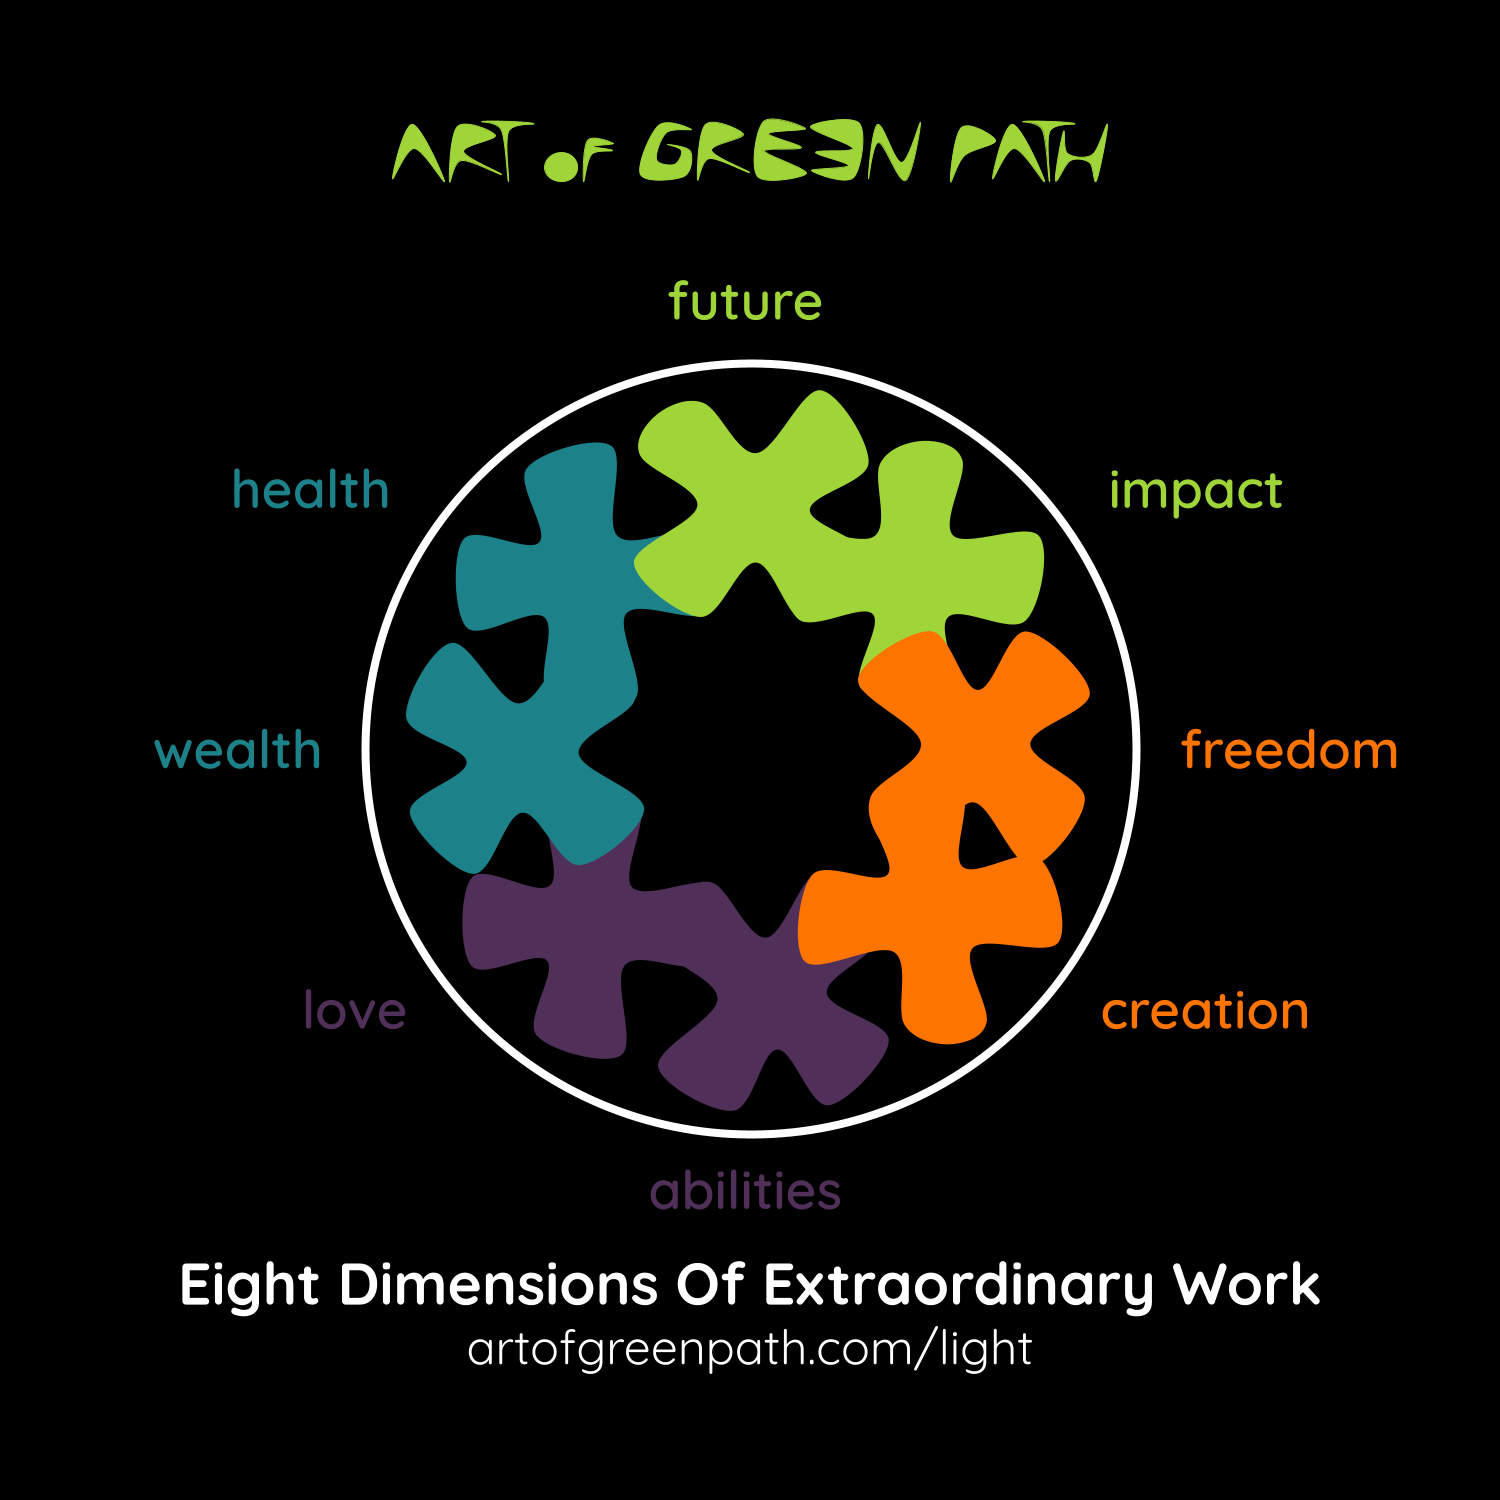 Eight Dimensions Of Extraordinary Work by Art Of Green Path